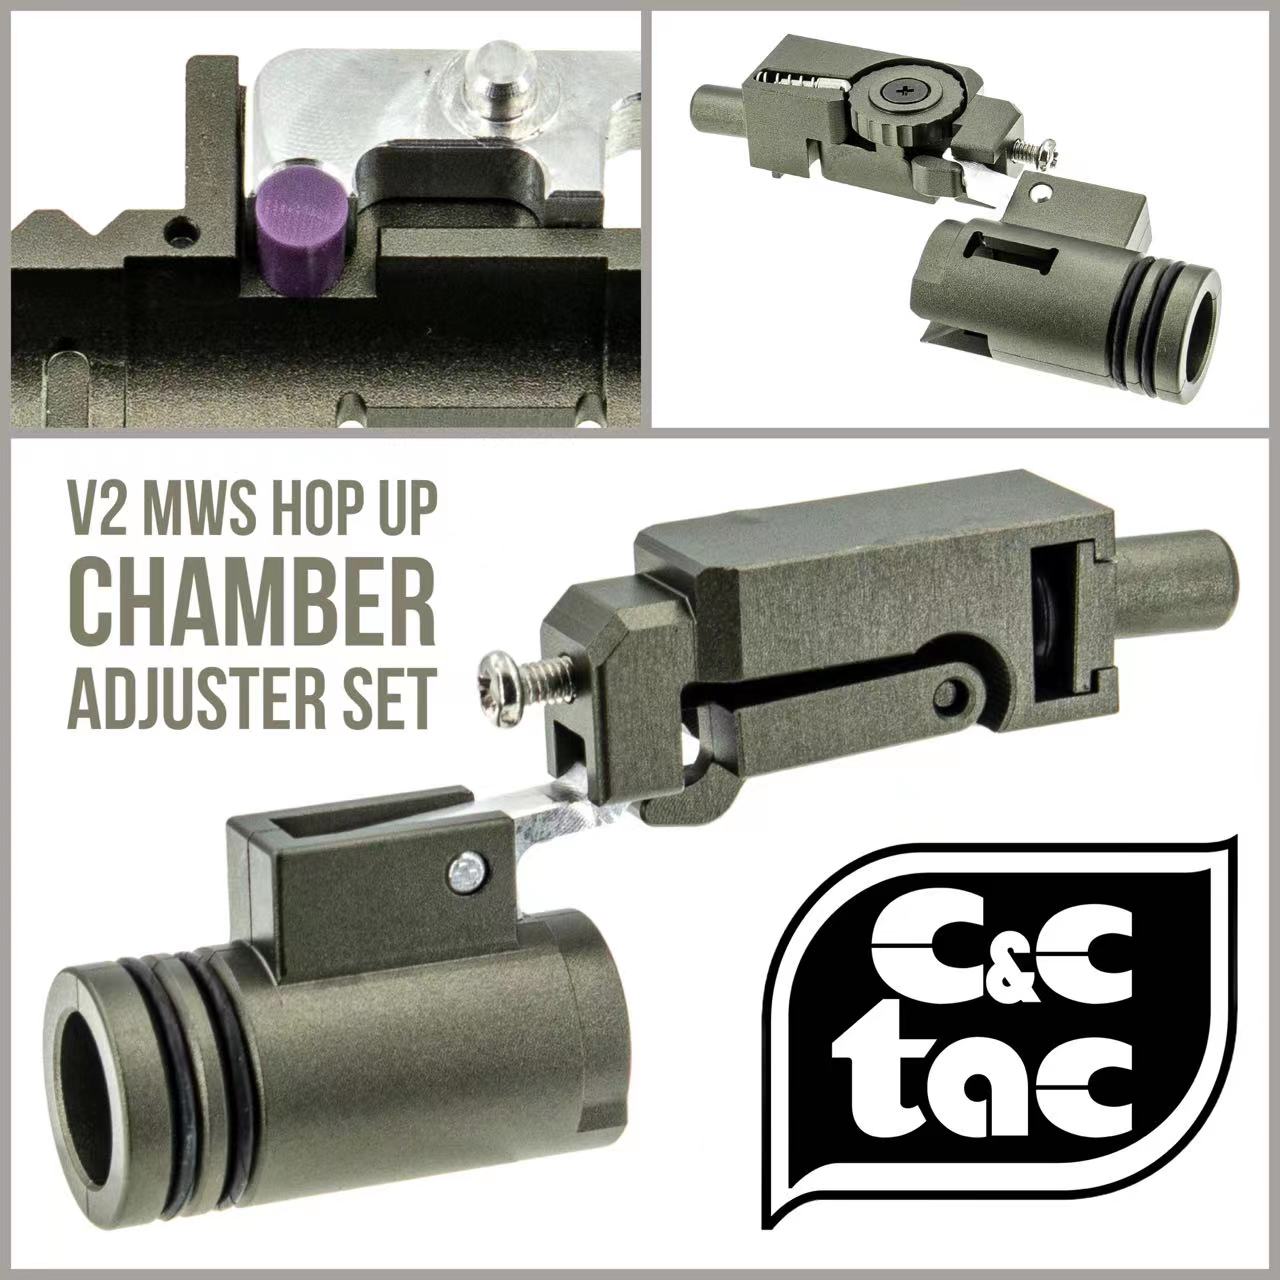 C&C V2 MWS Hop Up System for Marui TM MWS GBB Series ( Chamber Base and Adjuster Set ) ( CNC T651 Aluminum )